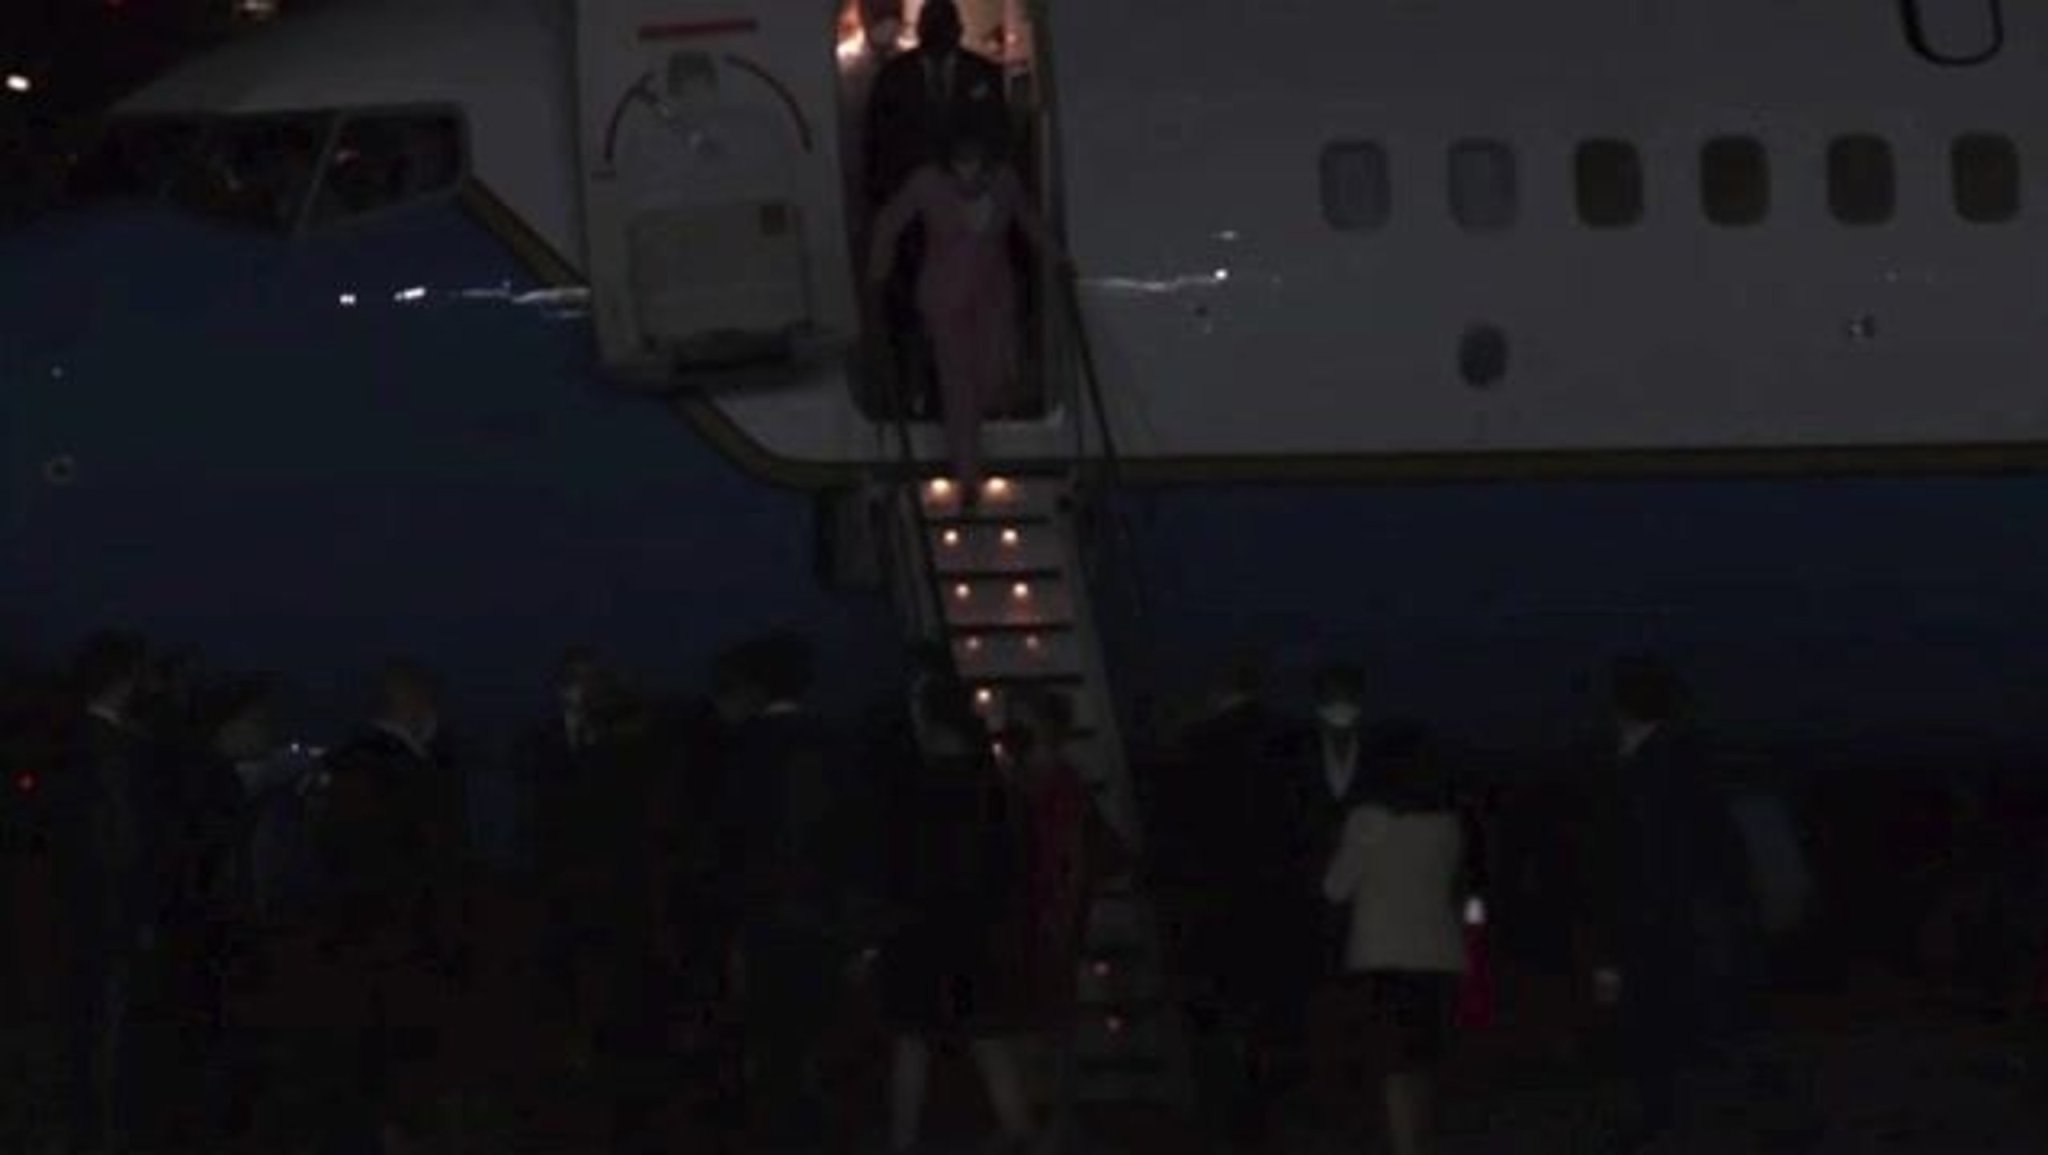 House Speaker Nancy Pelosi walks off the plane after touching down in Taiwan.